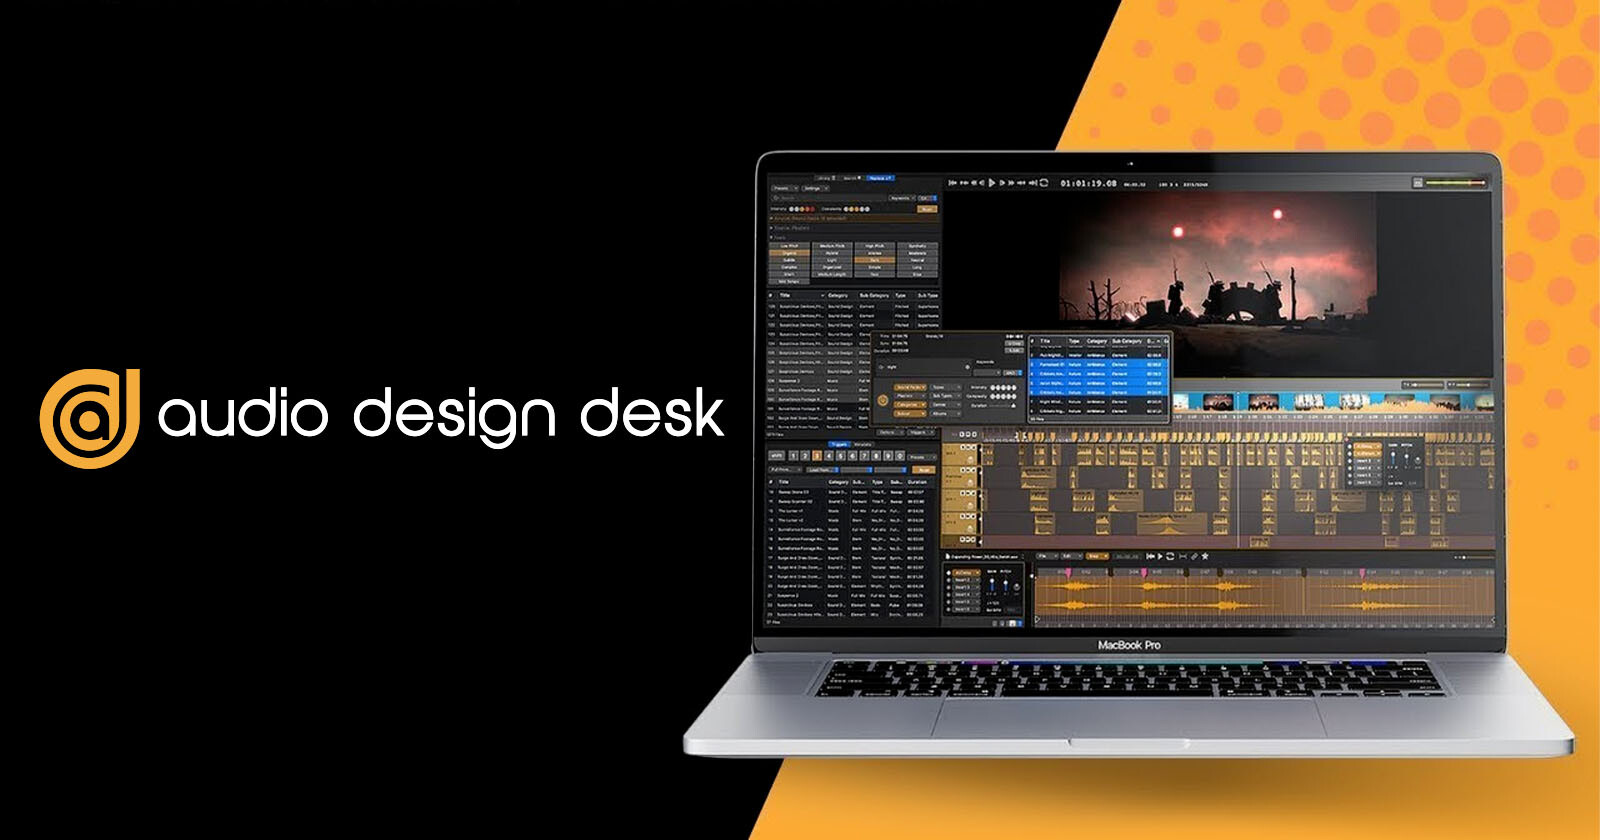 Audio Design Desk Software Uses AI to Know Where to Add Sound Effects